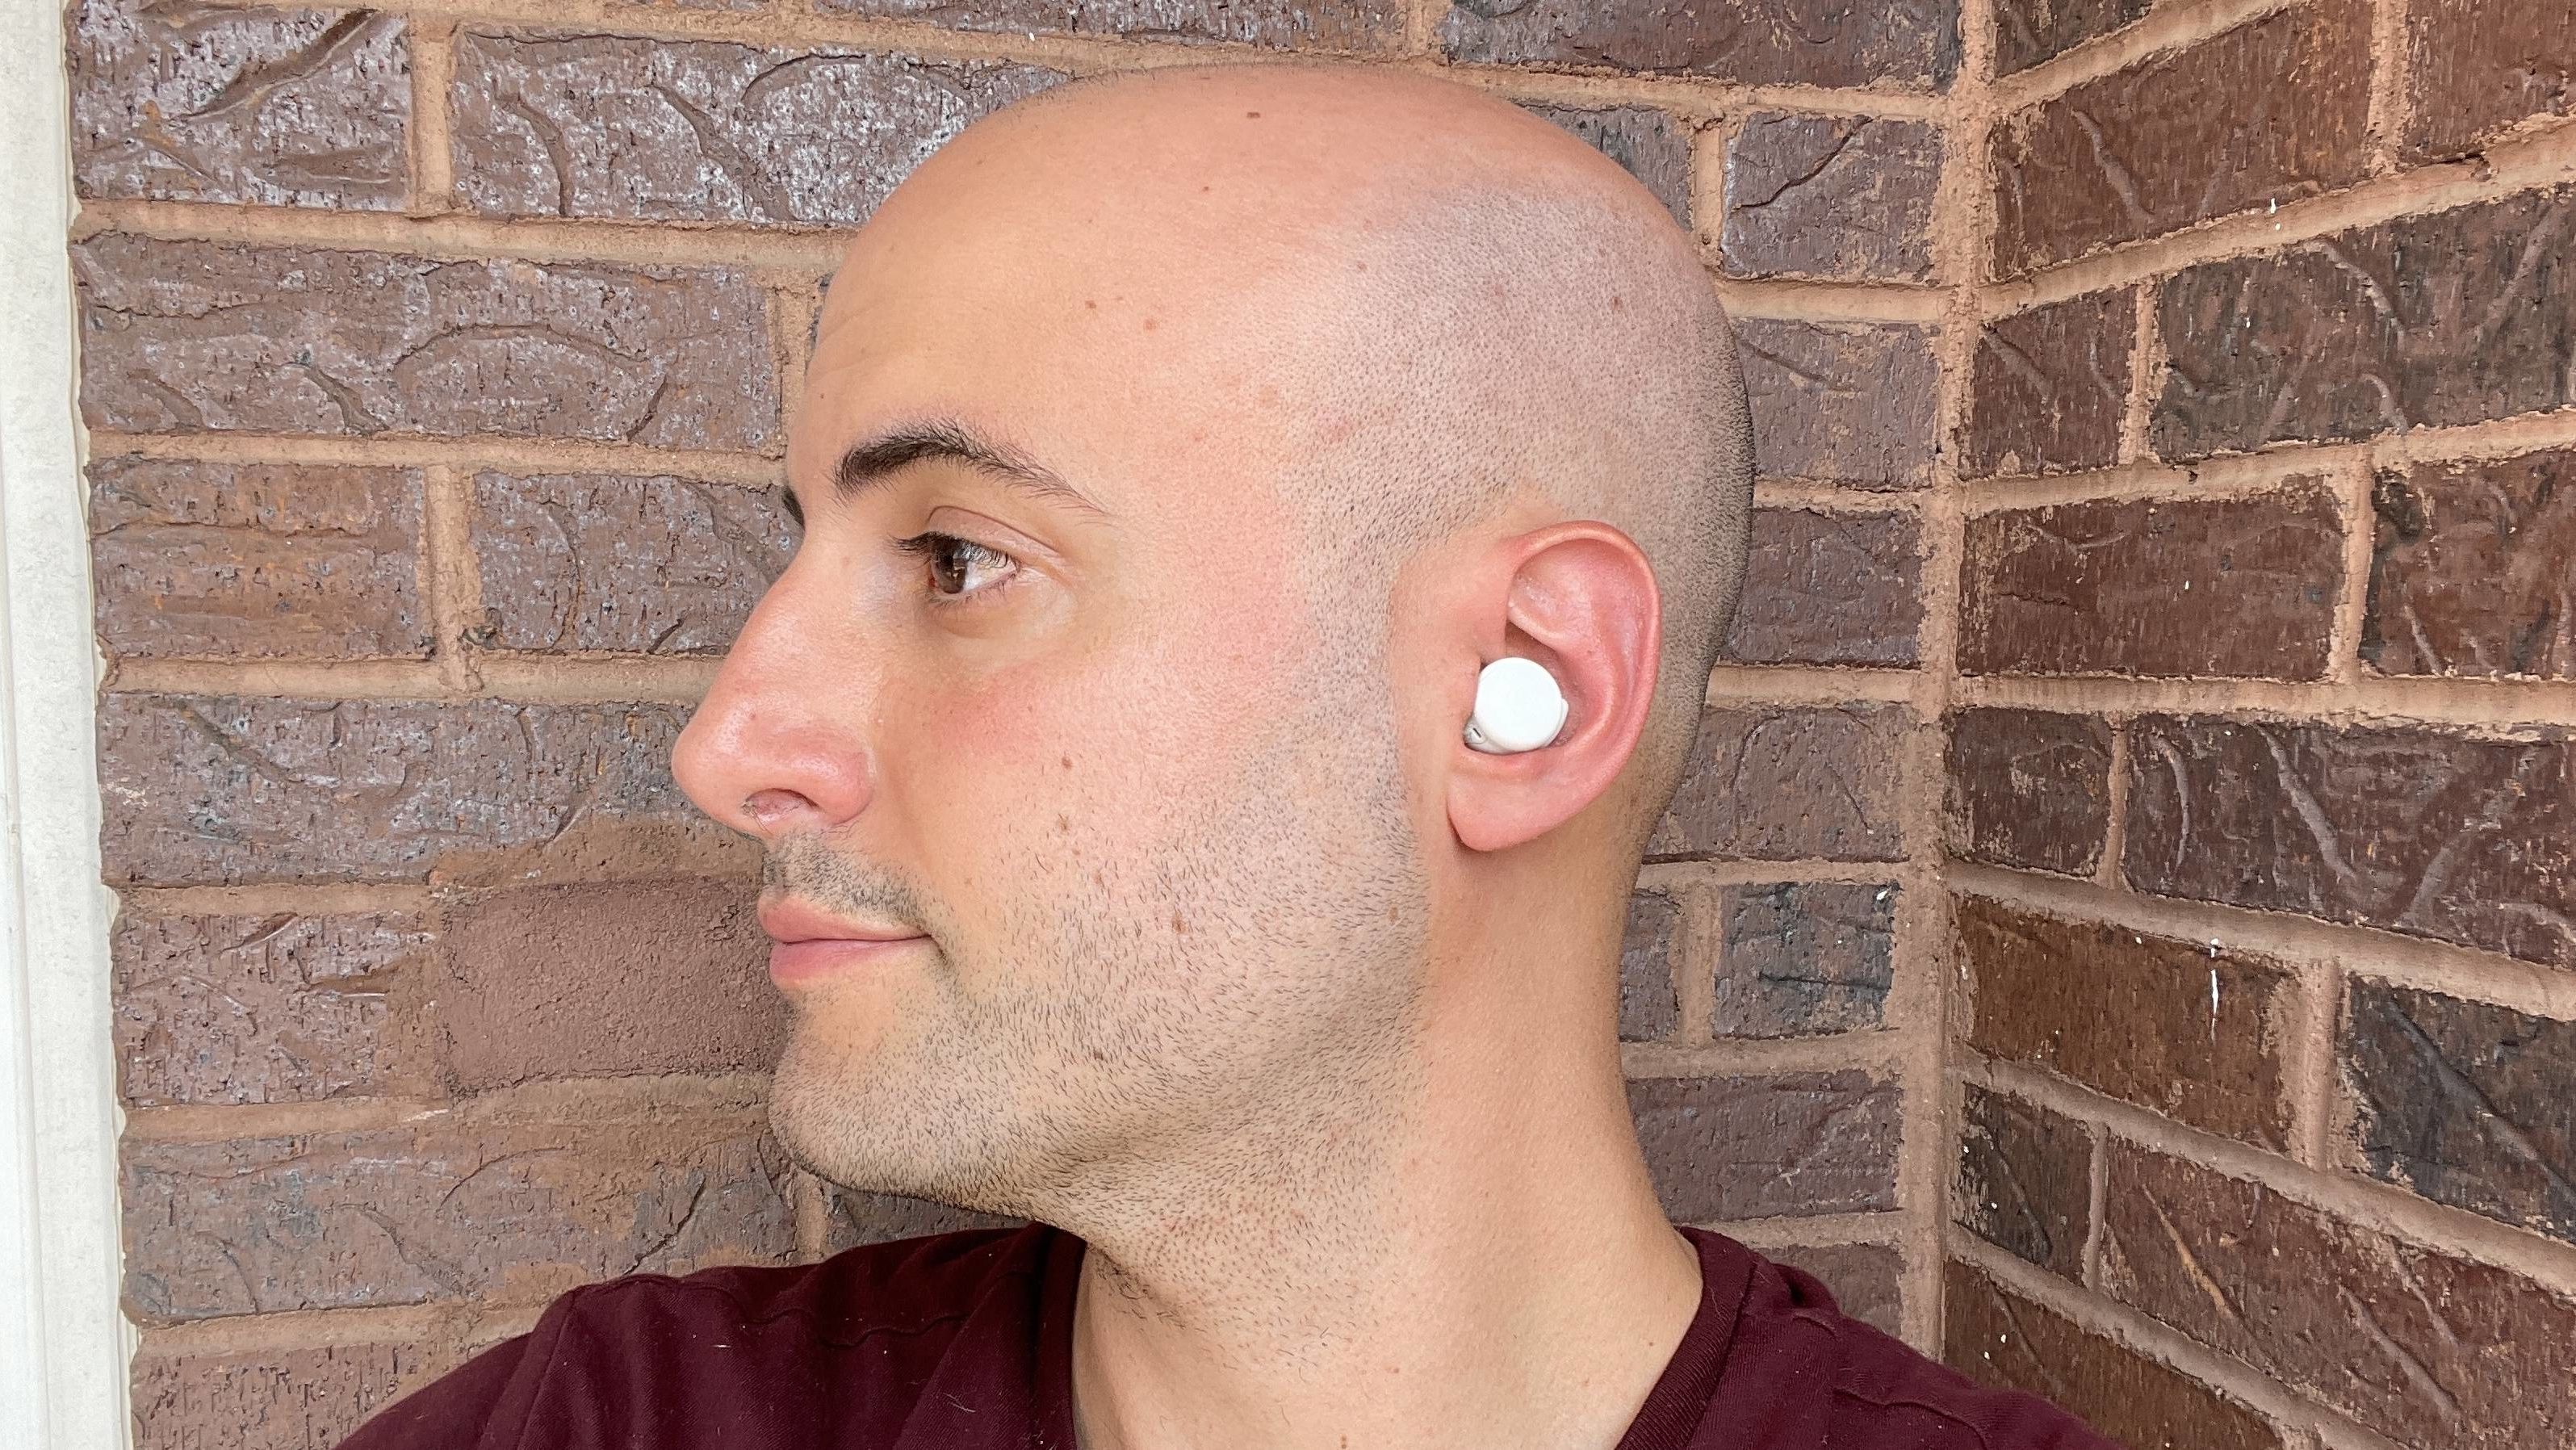 Google's Pixel Buds A Series are an exercise in earbud cost